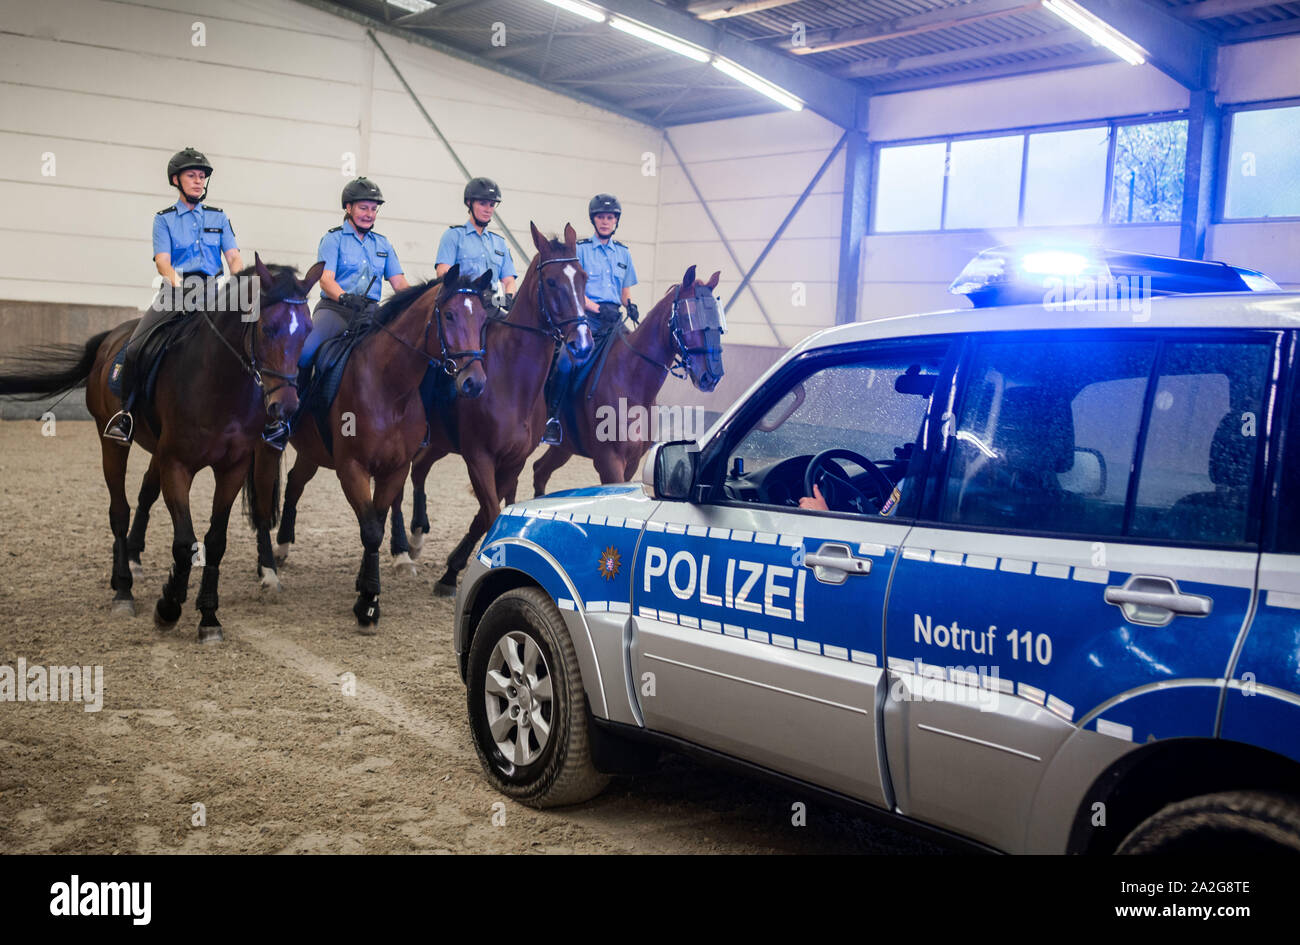 27 September 2019, Hessen, Frankfurt/Main: Horses of the police riding relay Hessen go forward during a training hour in the indoor riding arena, while the police vehicle drives backwards. The animals are accustomed from the outset to reacting calmly to unusual events of an optical or acoustic nature. (to dpa 'Police horses are often 'last resort when it gets tight'' from 03.10.2019) Photo: Frank Rumpenhorst/dpa Stock Photo